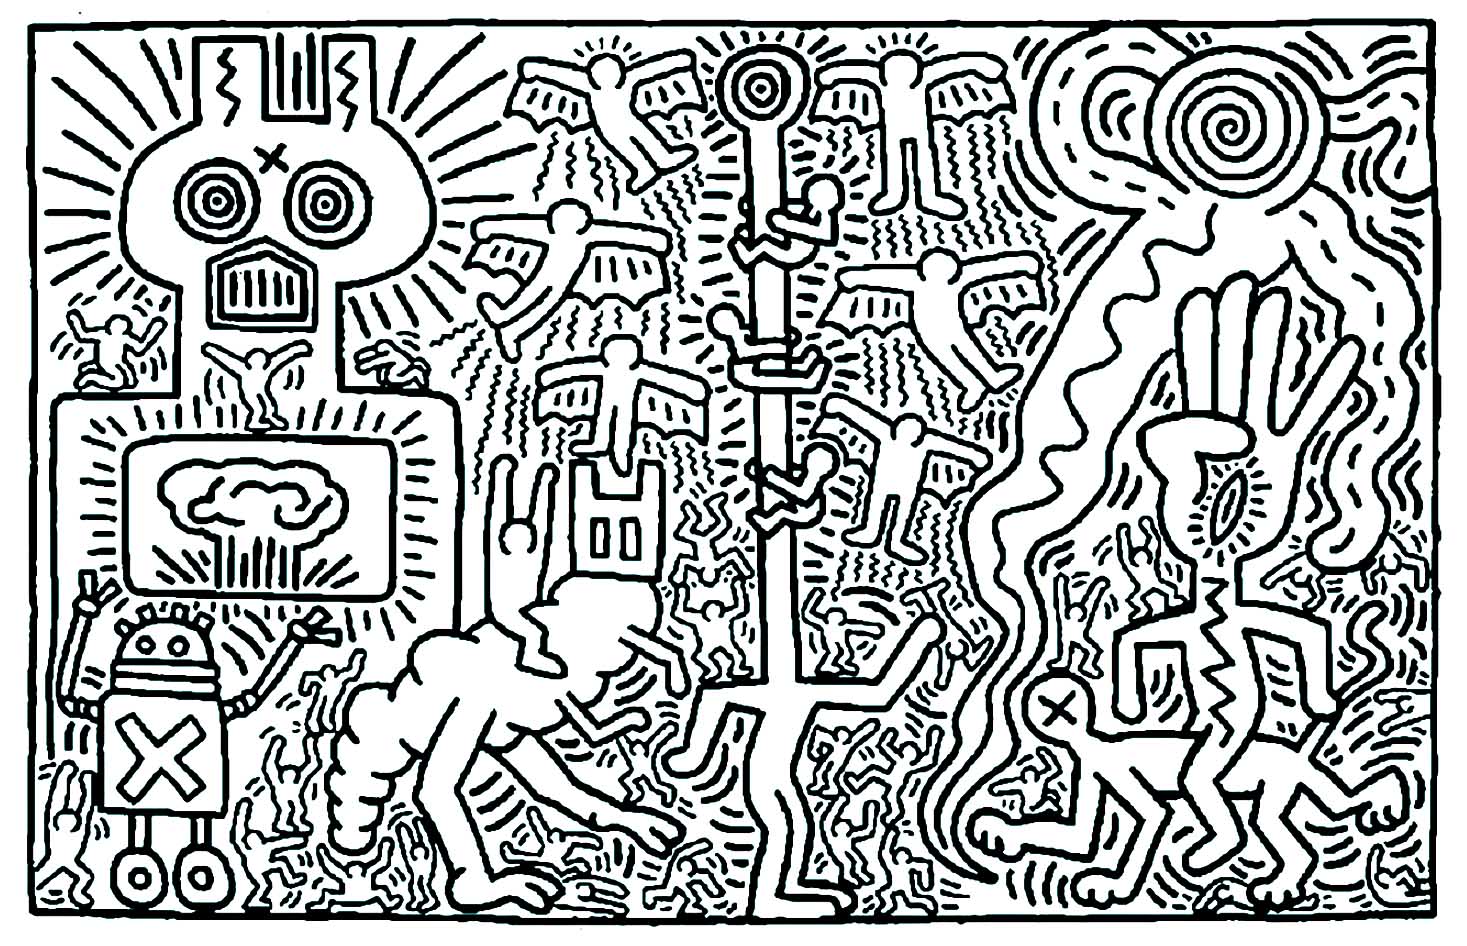 Coloring adult keith haring 2